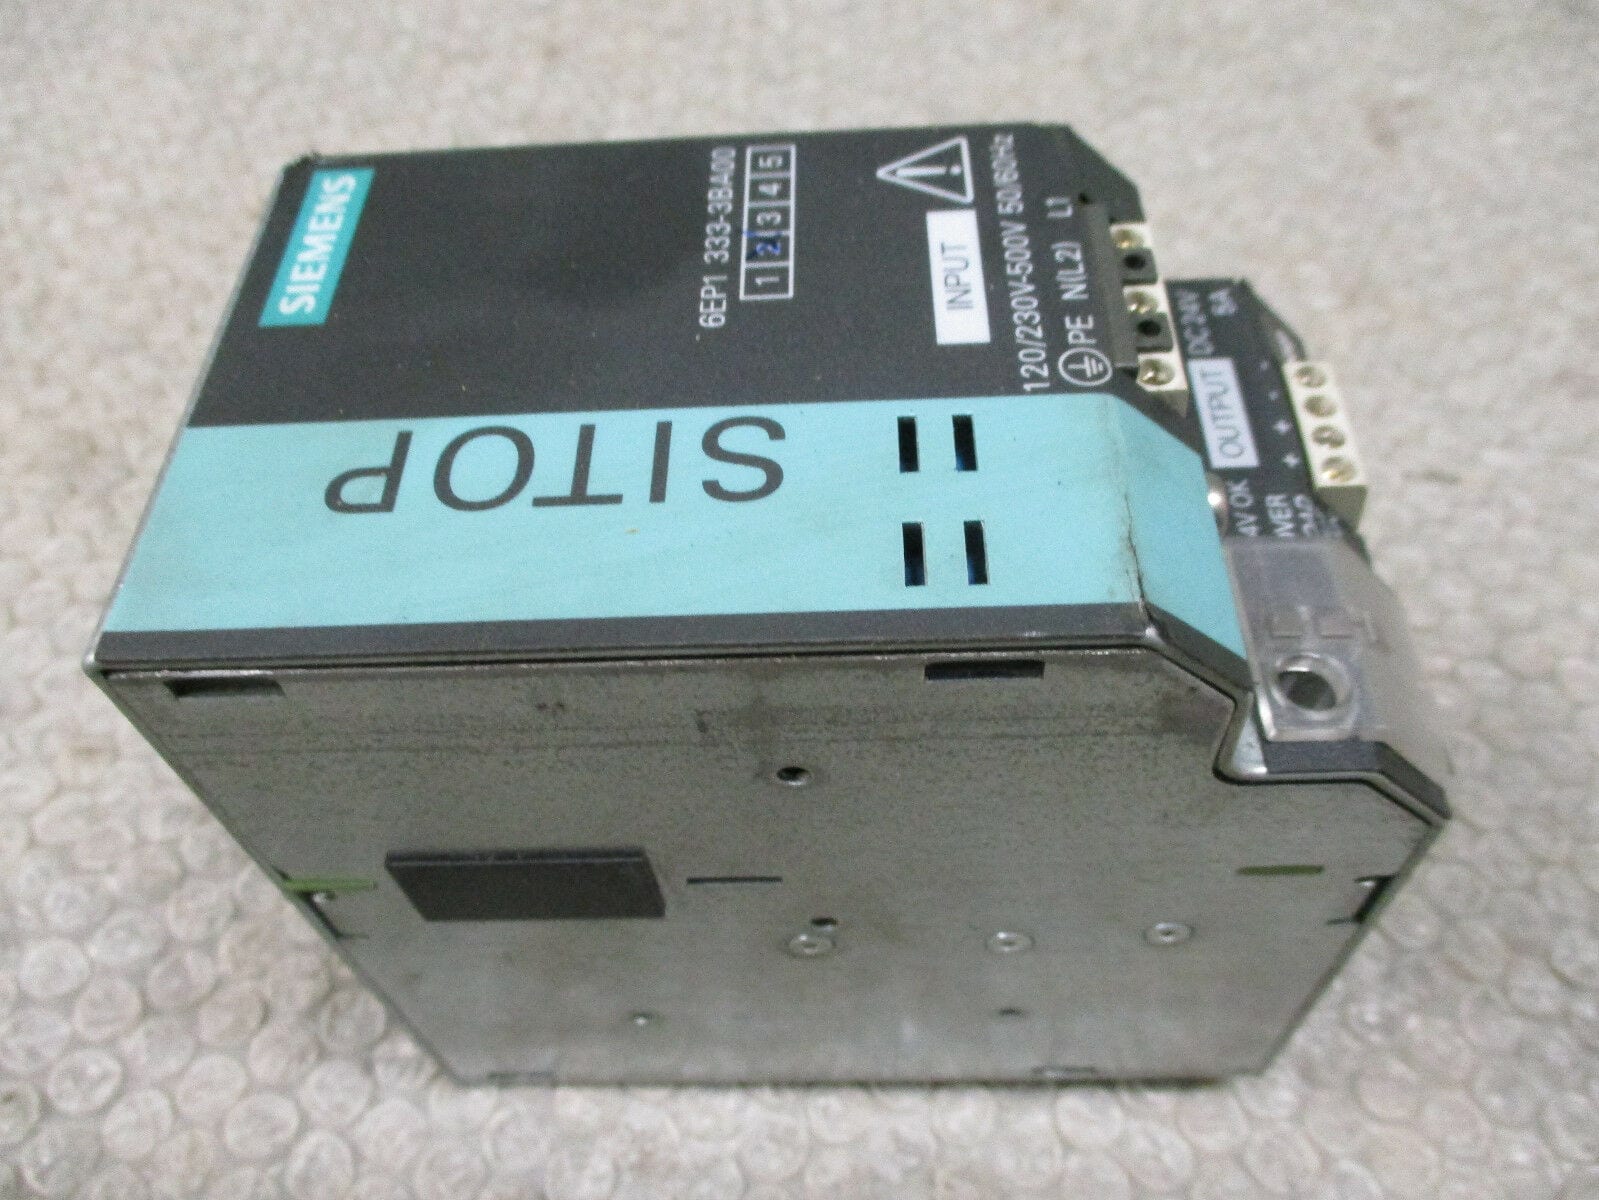 Siemens SITOP Power 5 DC Power Supply 1p-6ep 333-2aa00 for sale online 